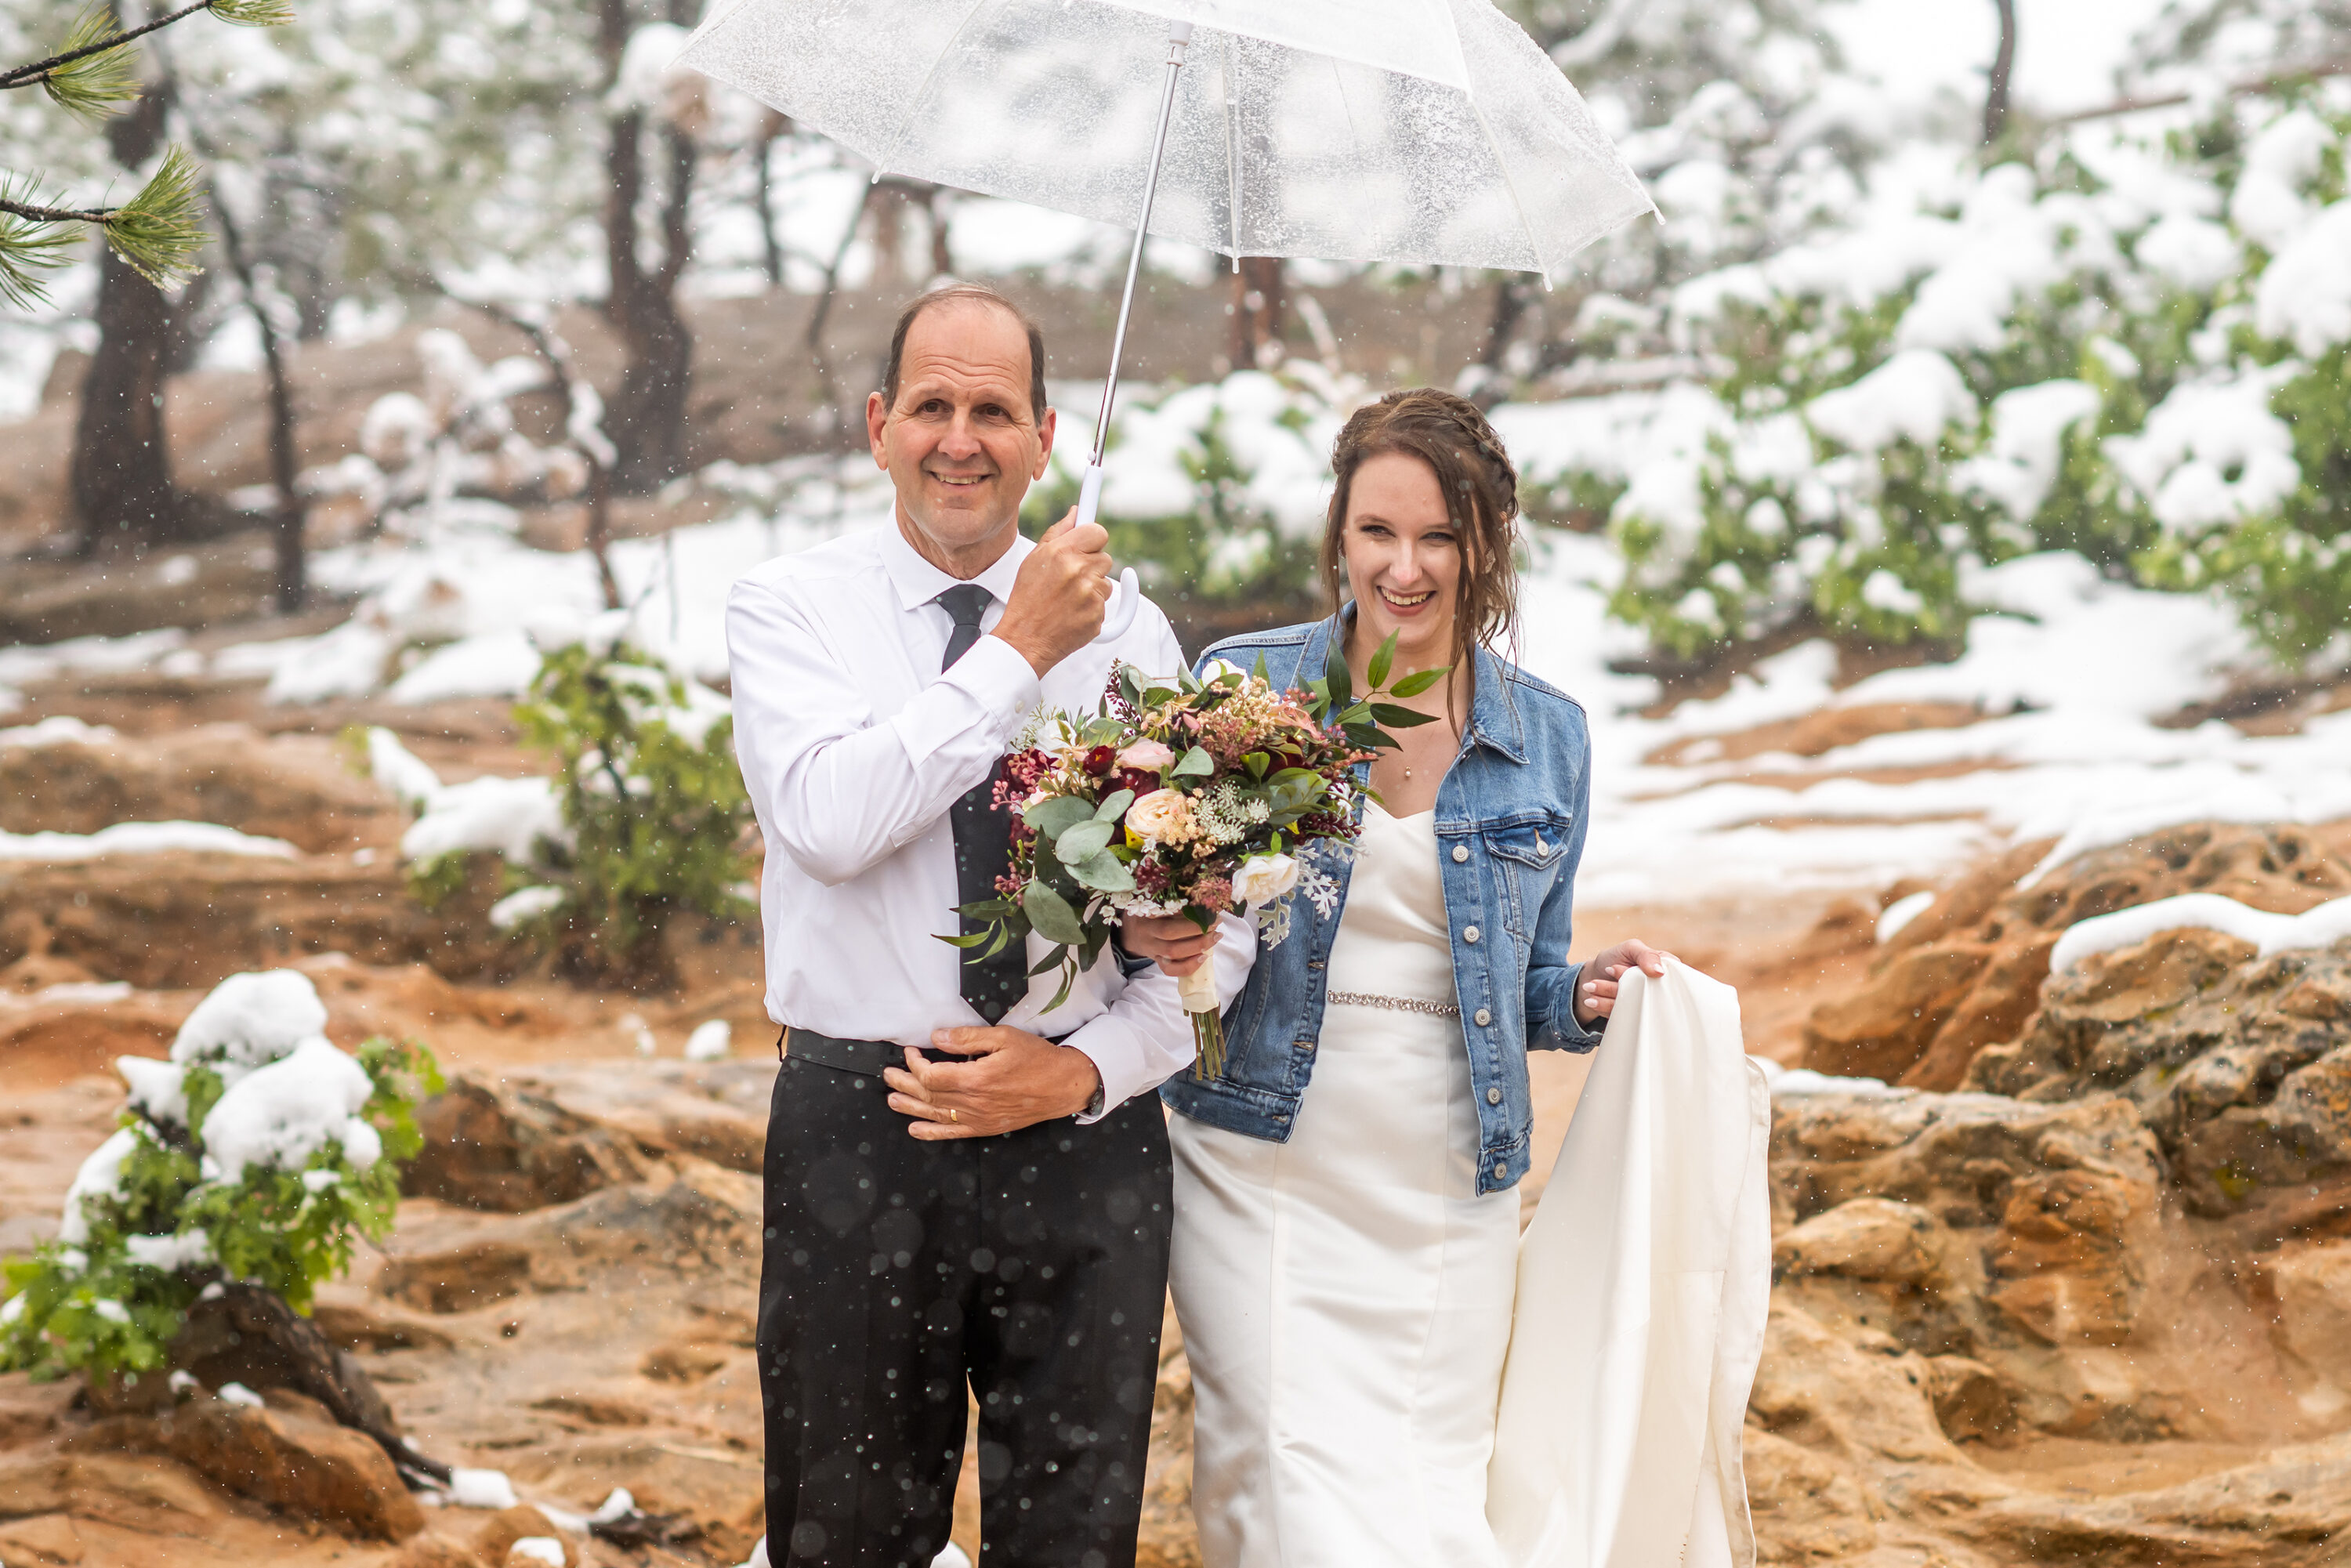 Liz walks down the aisle during her Roxborough State Park wedding at Lyons Overlook in the snow.